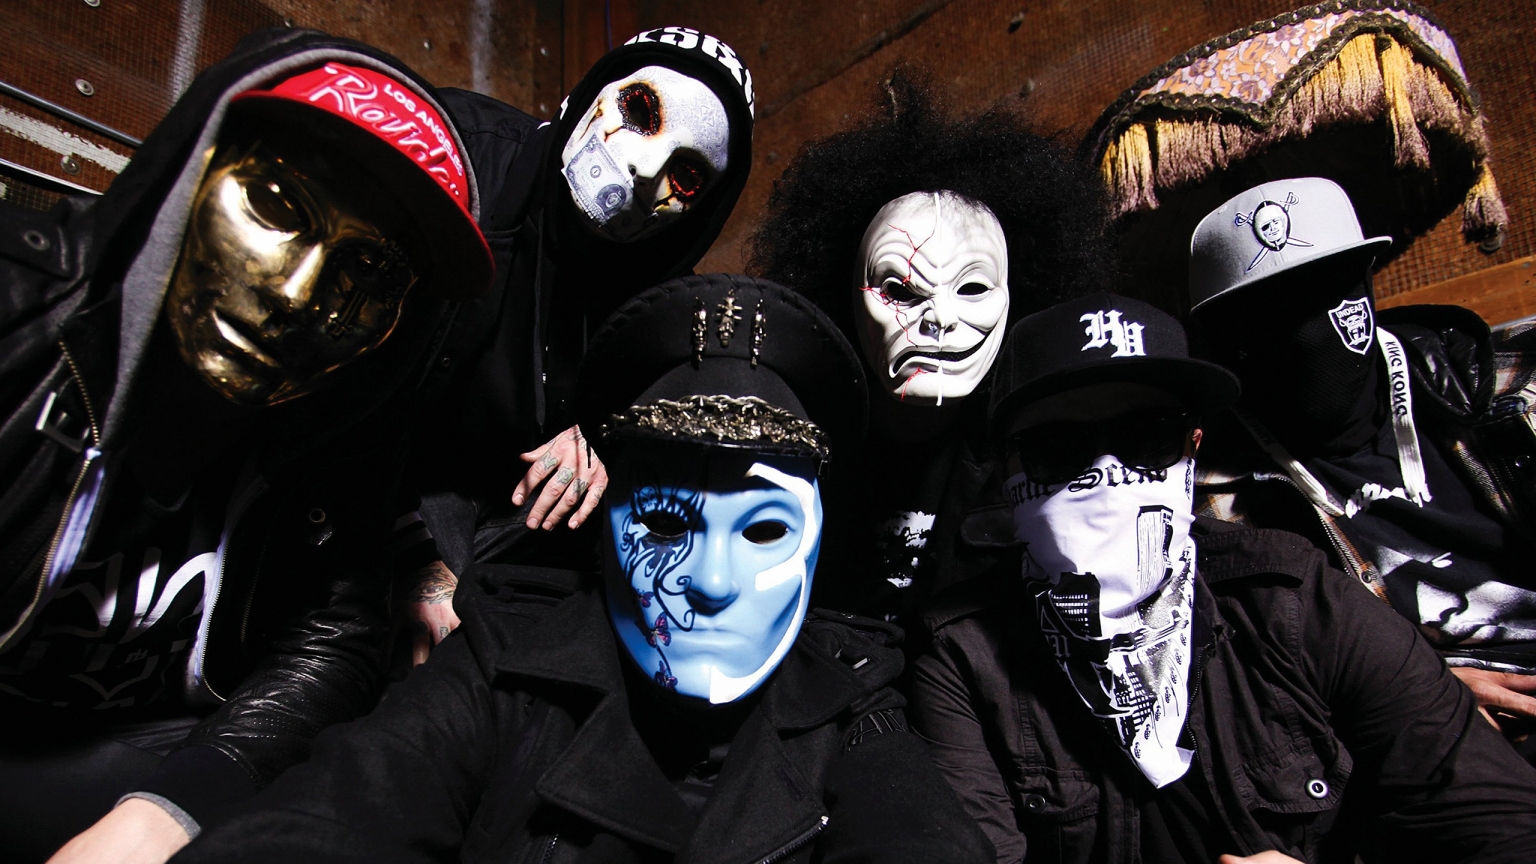 Hollywood Undead for 1536 x 864 HDTV resolution